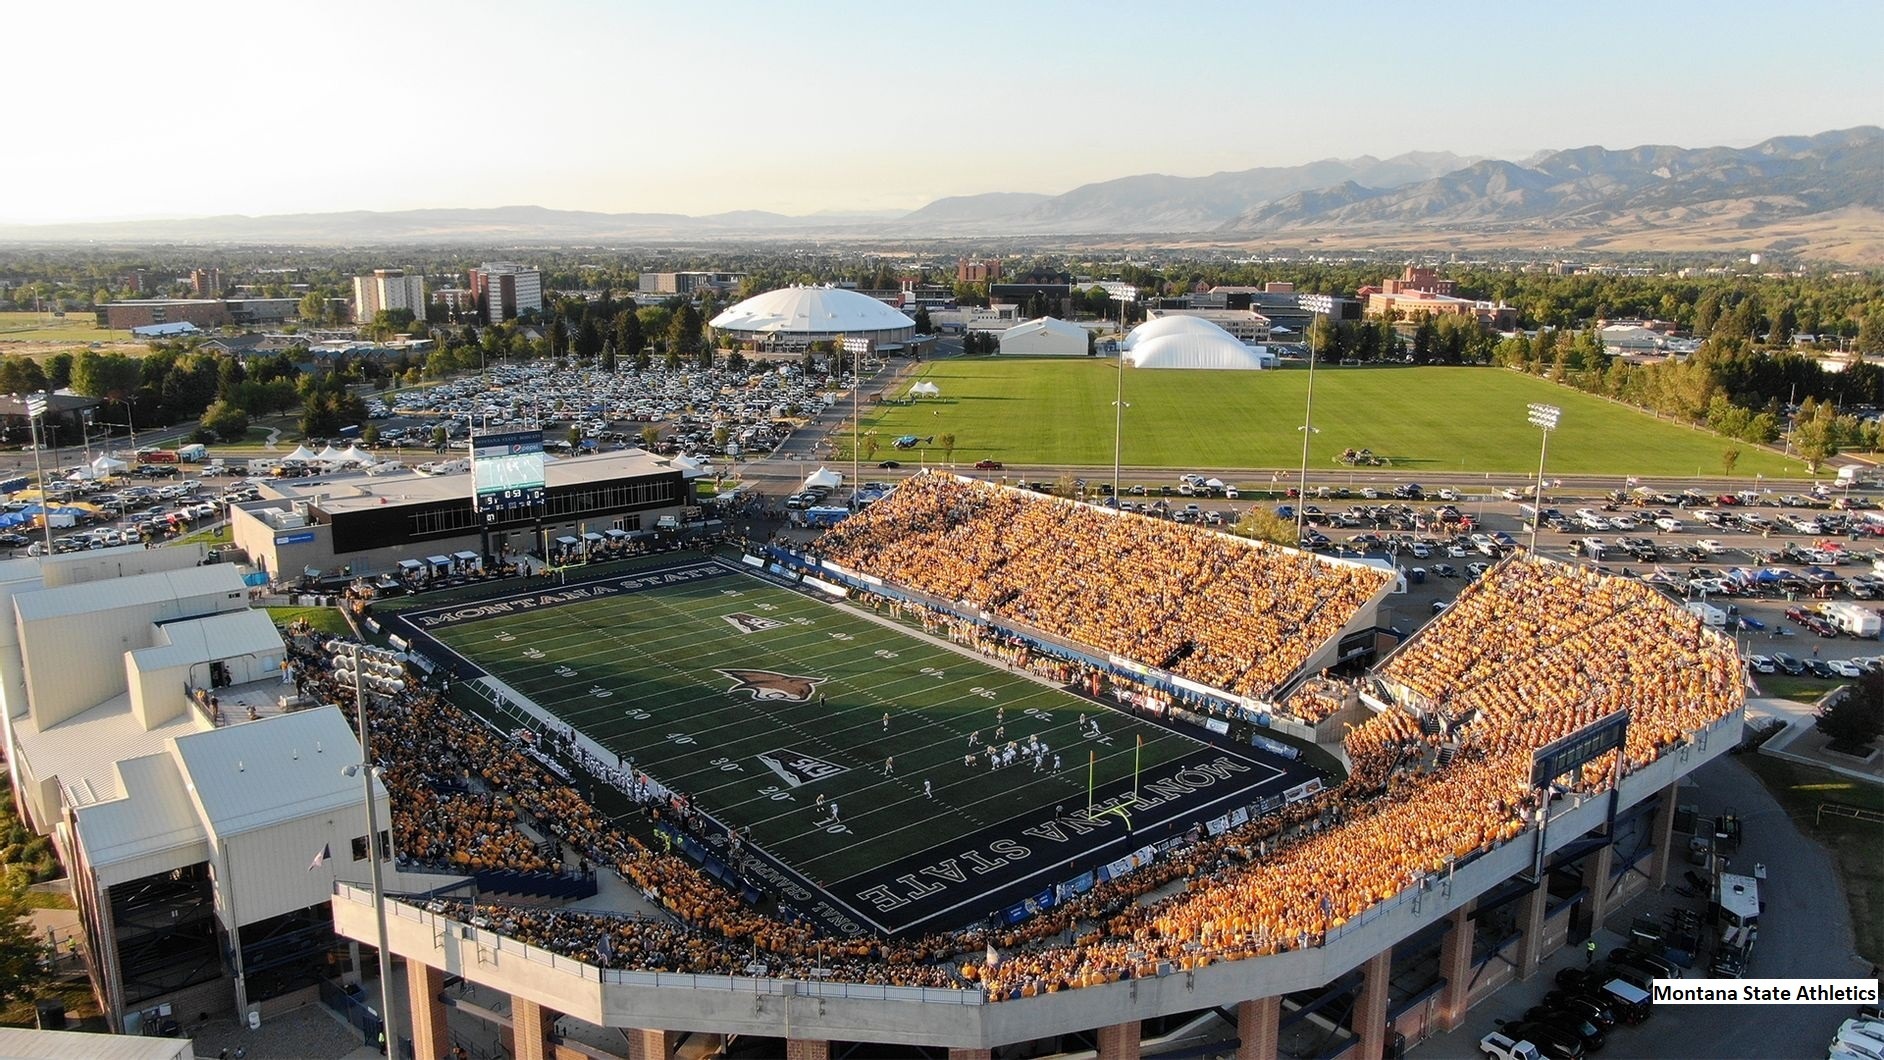 Montana State looking to get closer to Dakota State schools